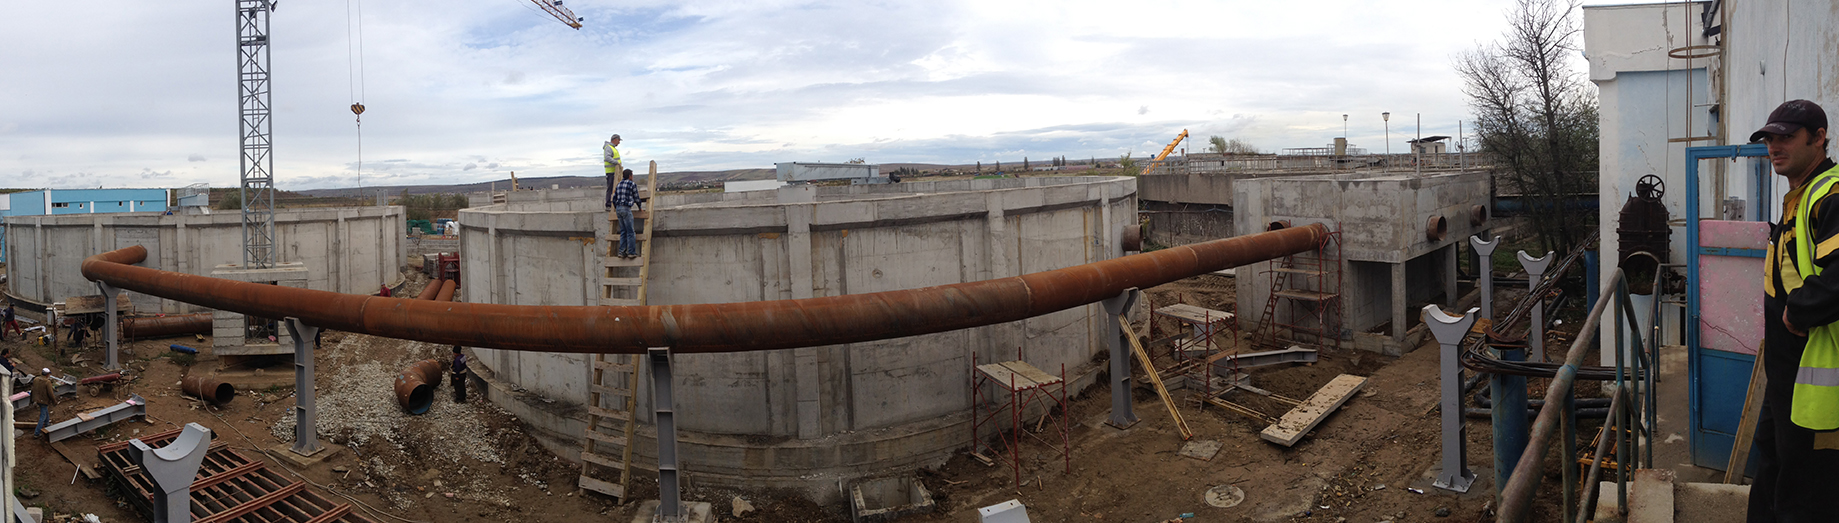 Construction of a Wastewater Treatment Plant in Isalnita